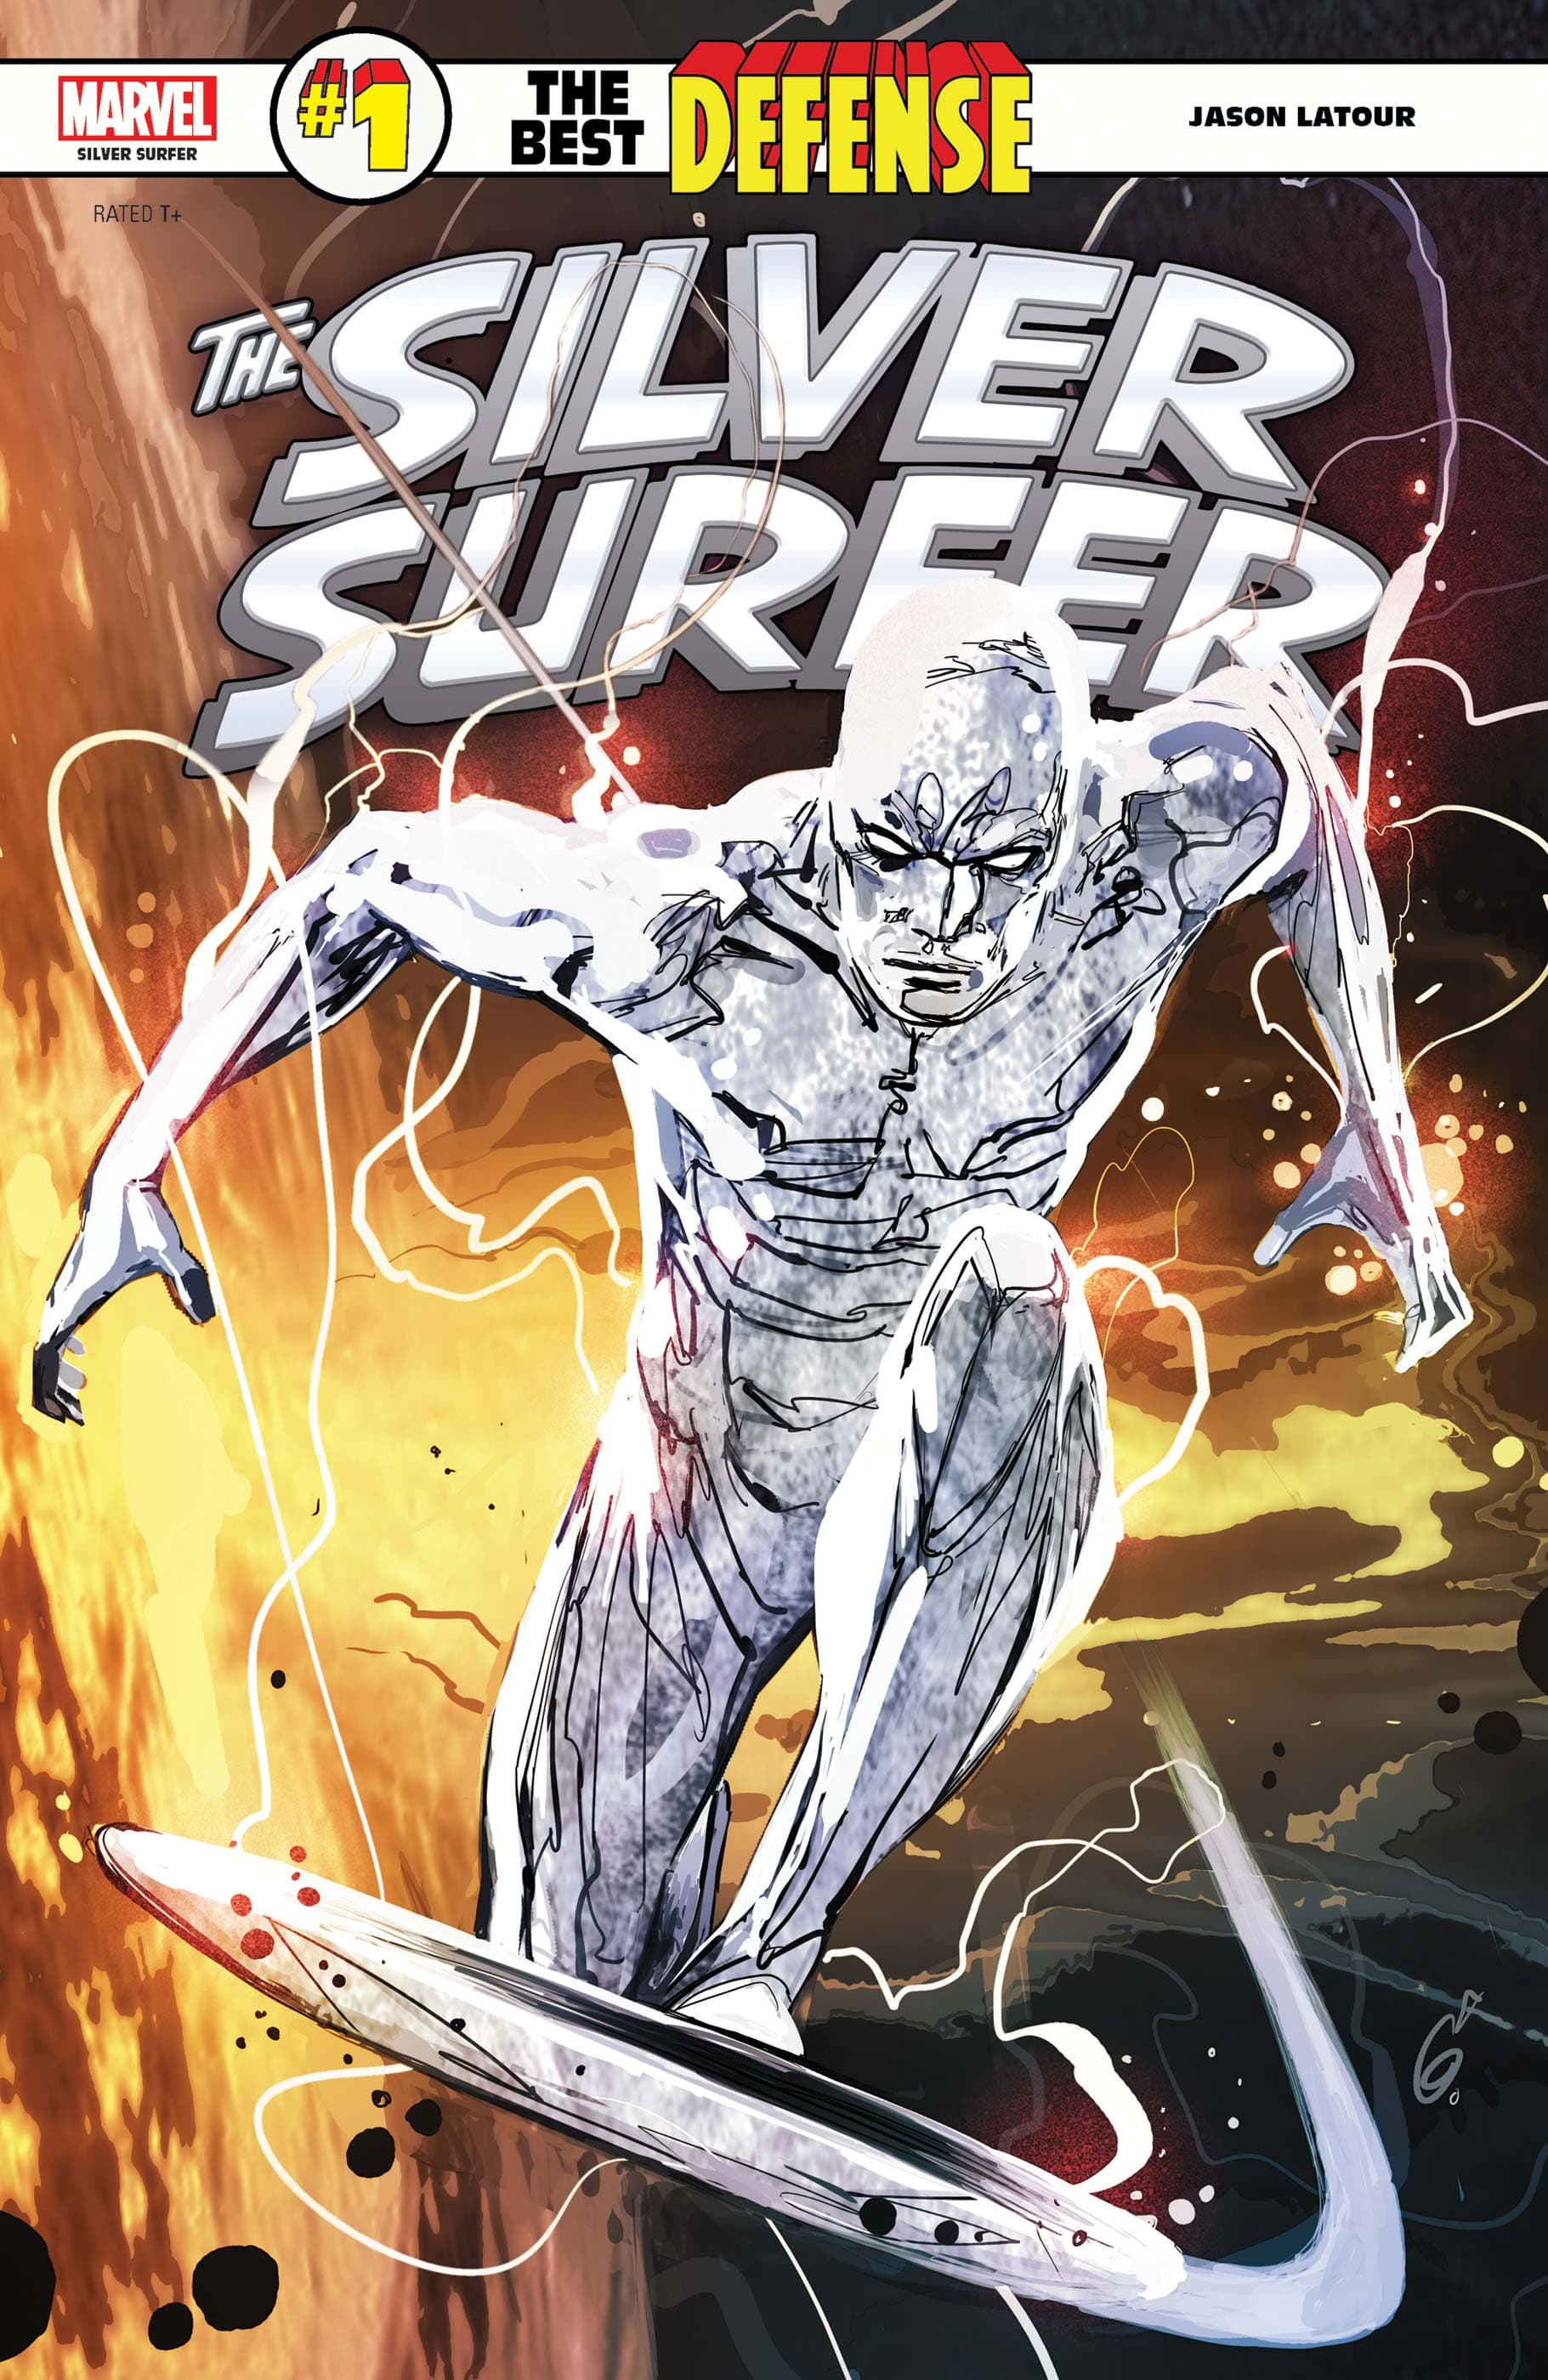  Silver Surfer: The Best Defense (2018) #1 cover by Ron Garney